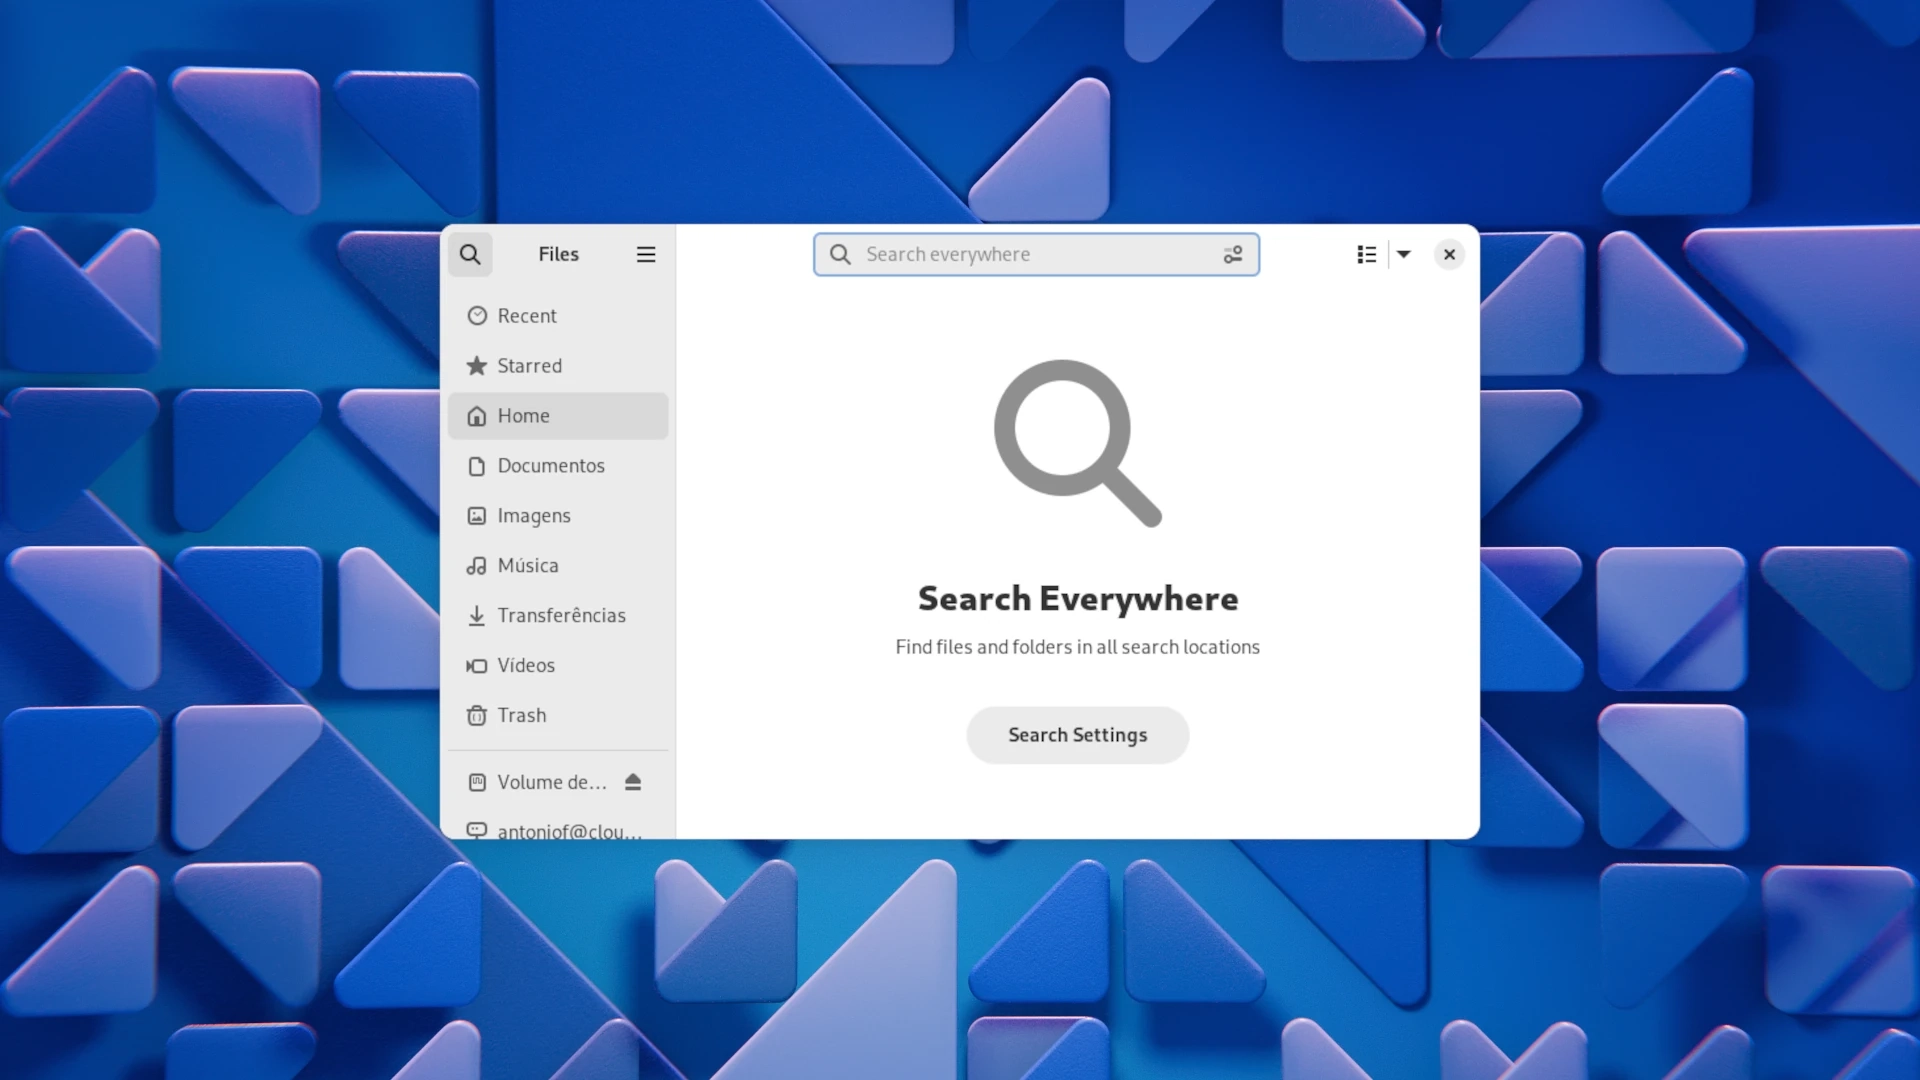 Introducing the New Global Search Mode in GNOME 46’s Nautilus File Manager